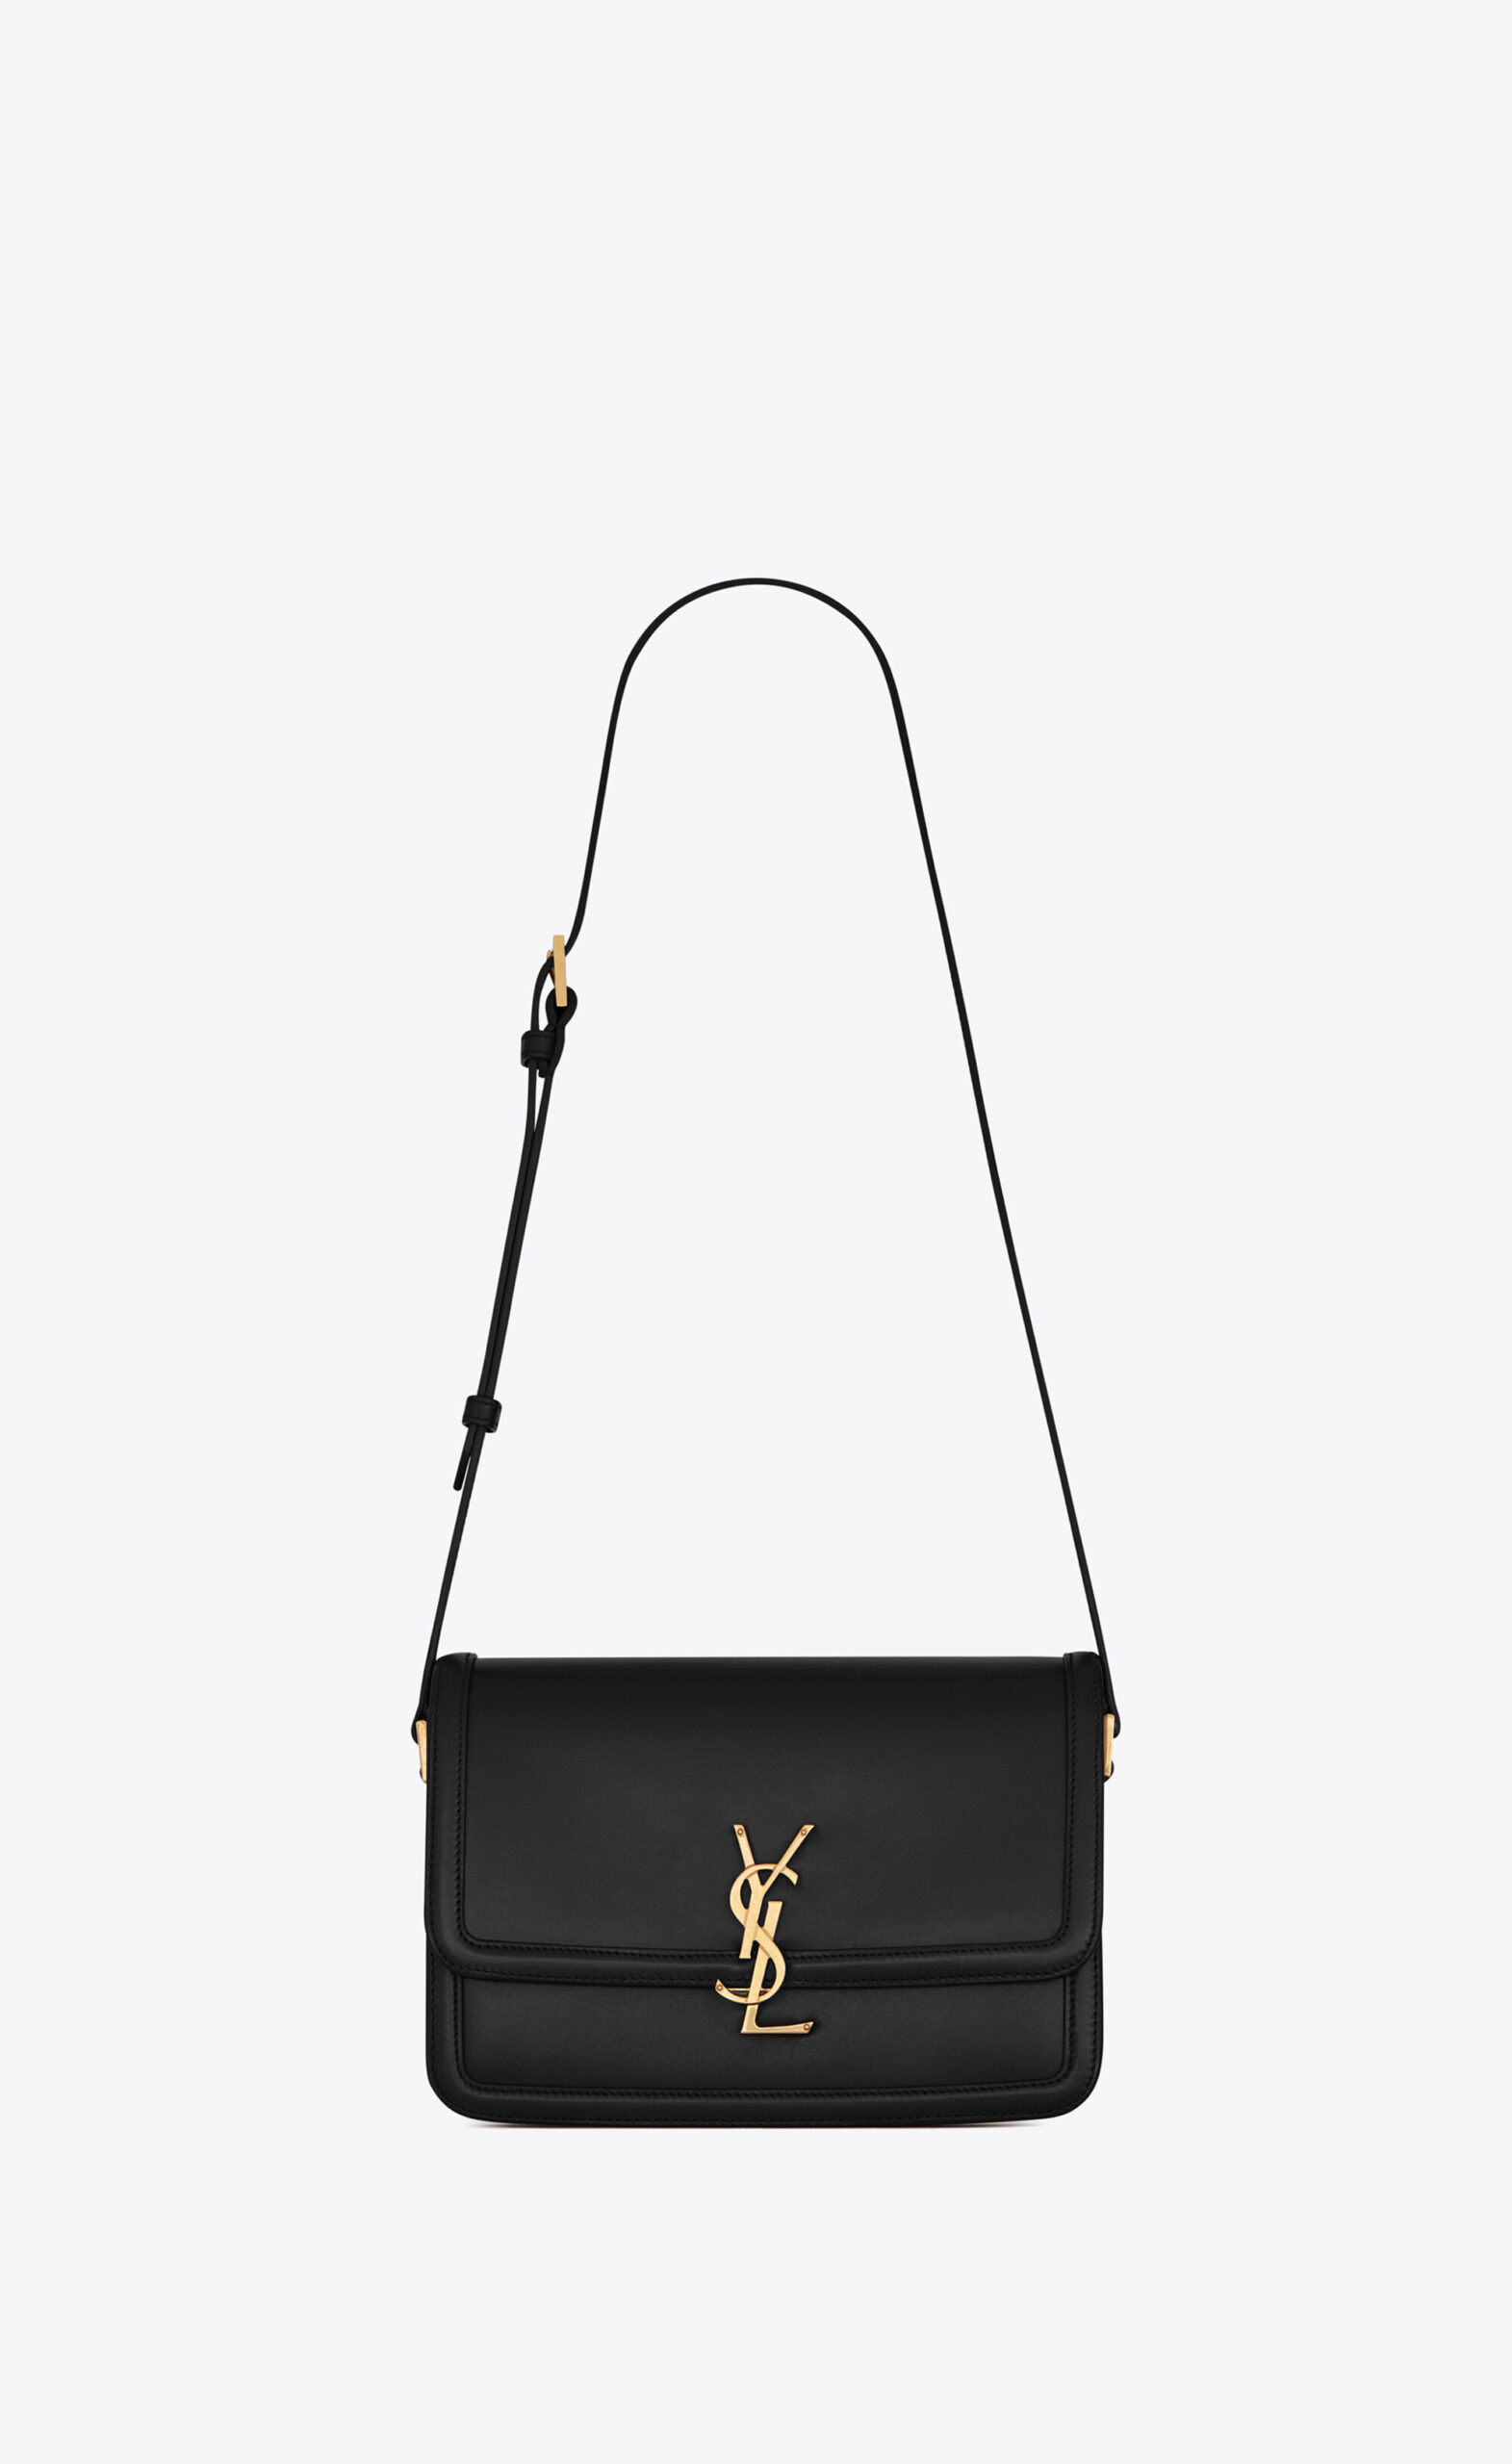 5 New Saint Laurent Bags That Are Worth Getting to Know - luxfy